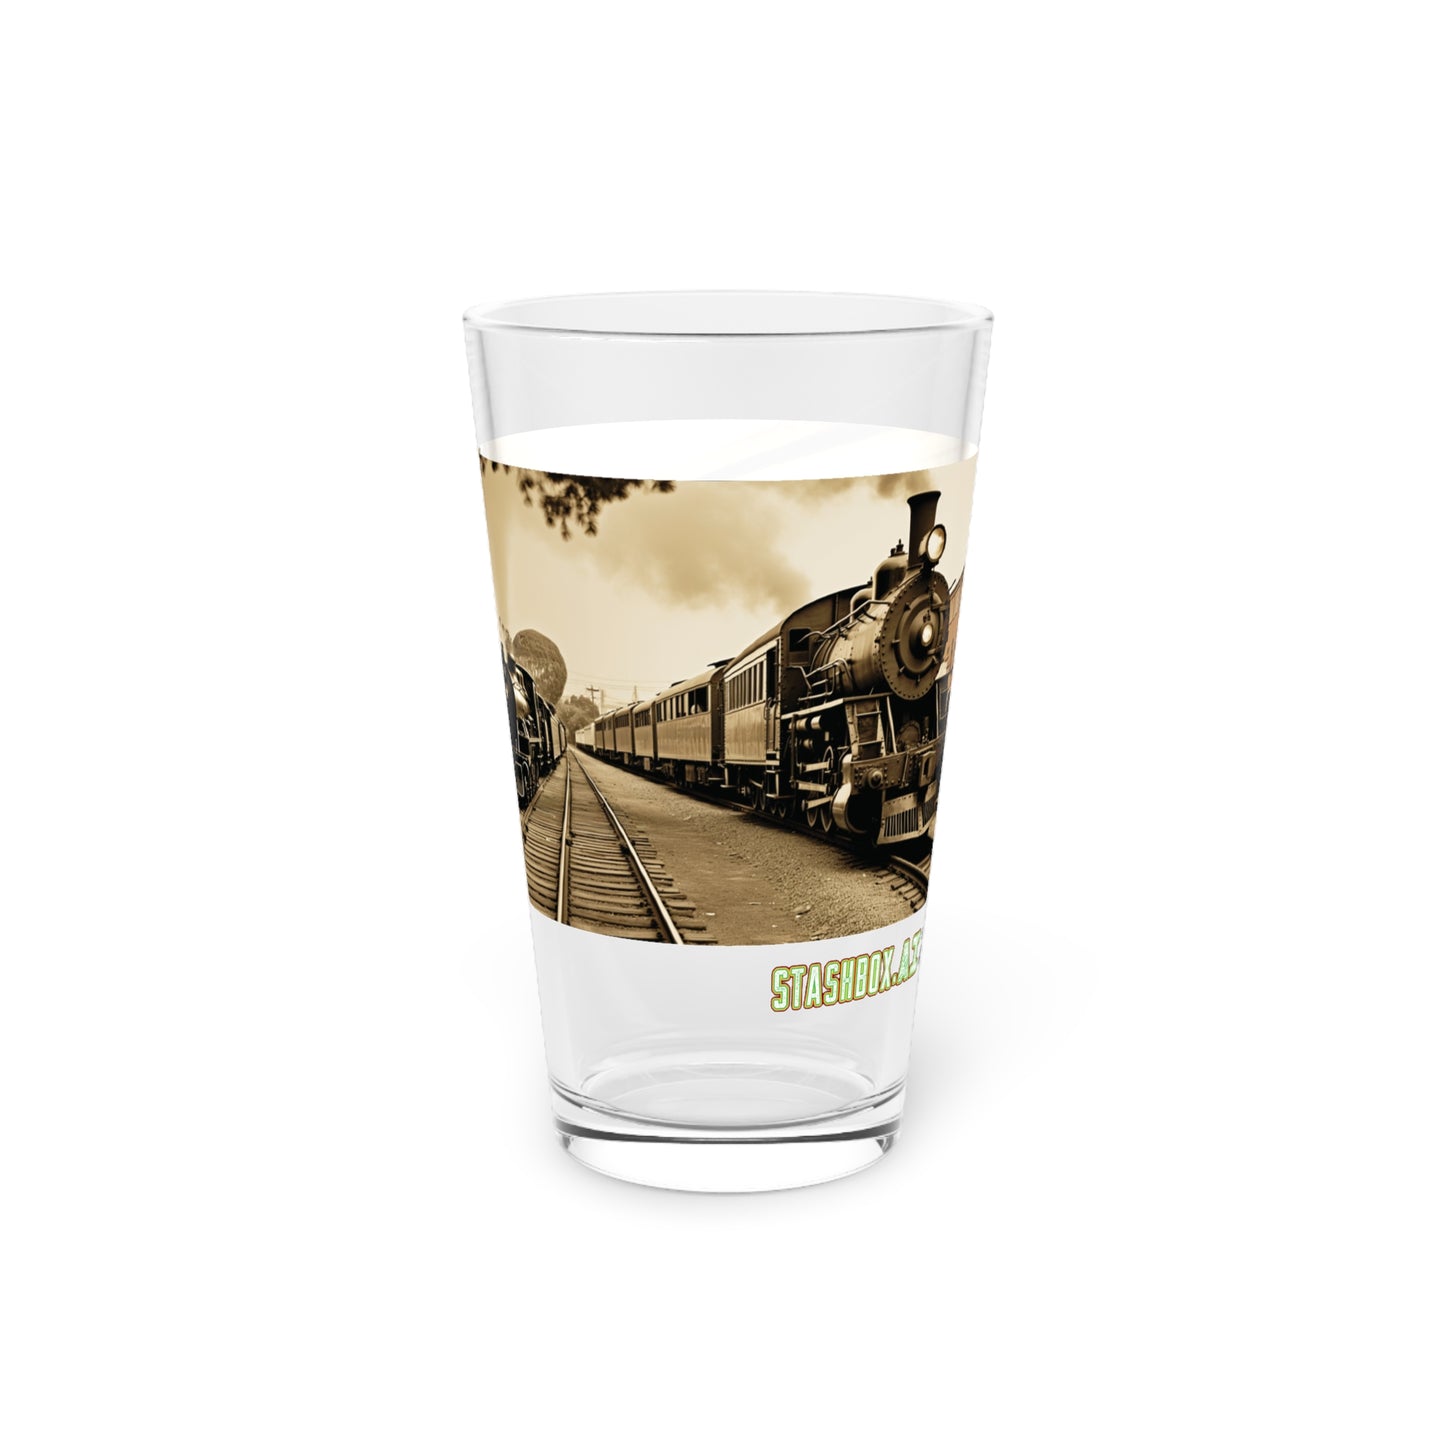  Experience the charm of yesteryears with our Old Classic Trains Pint Glass. The Tabletop Photography Style design captures the elegance of vintage trains, making every sip a reminiscent delight. #RetroRailways #StashboxMemories